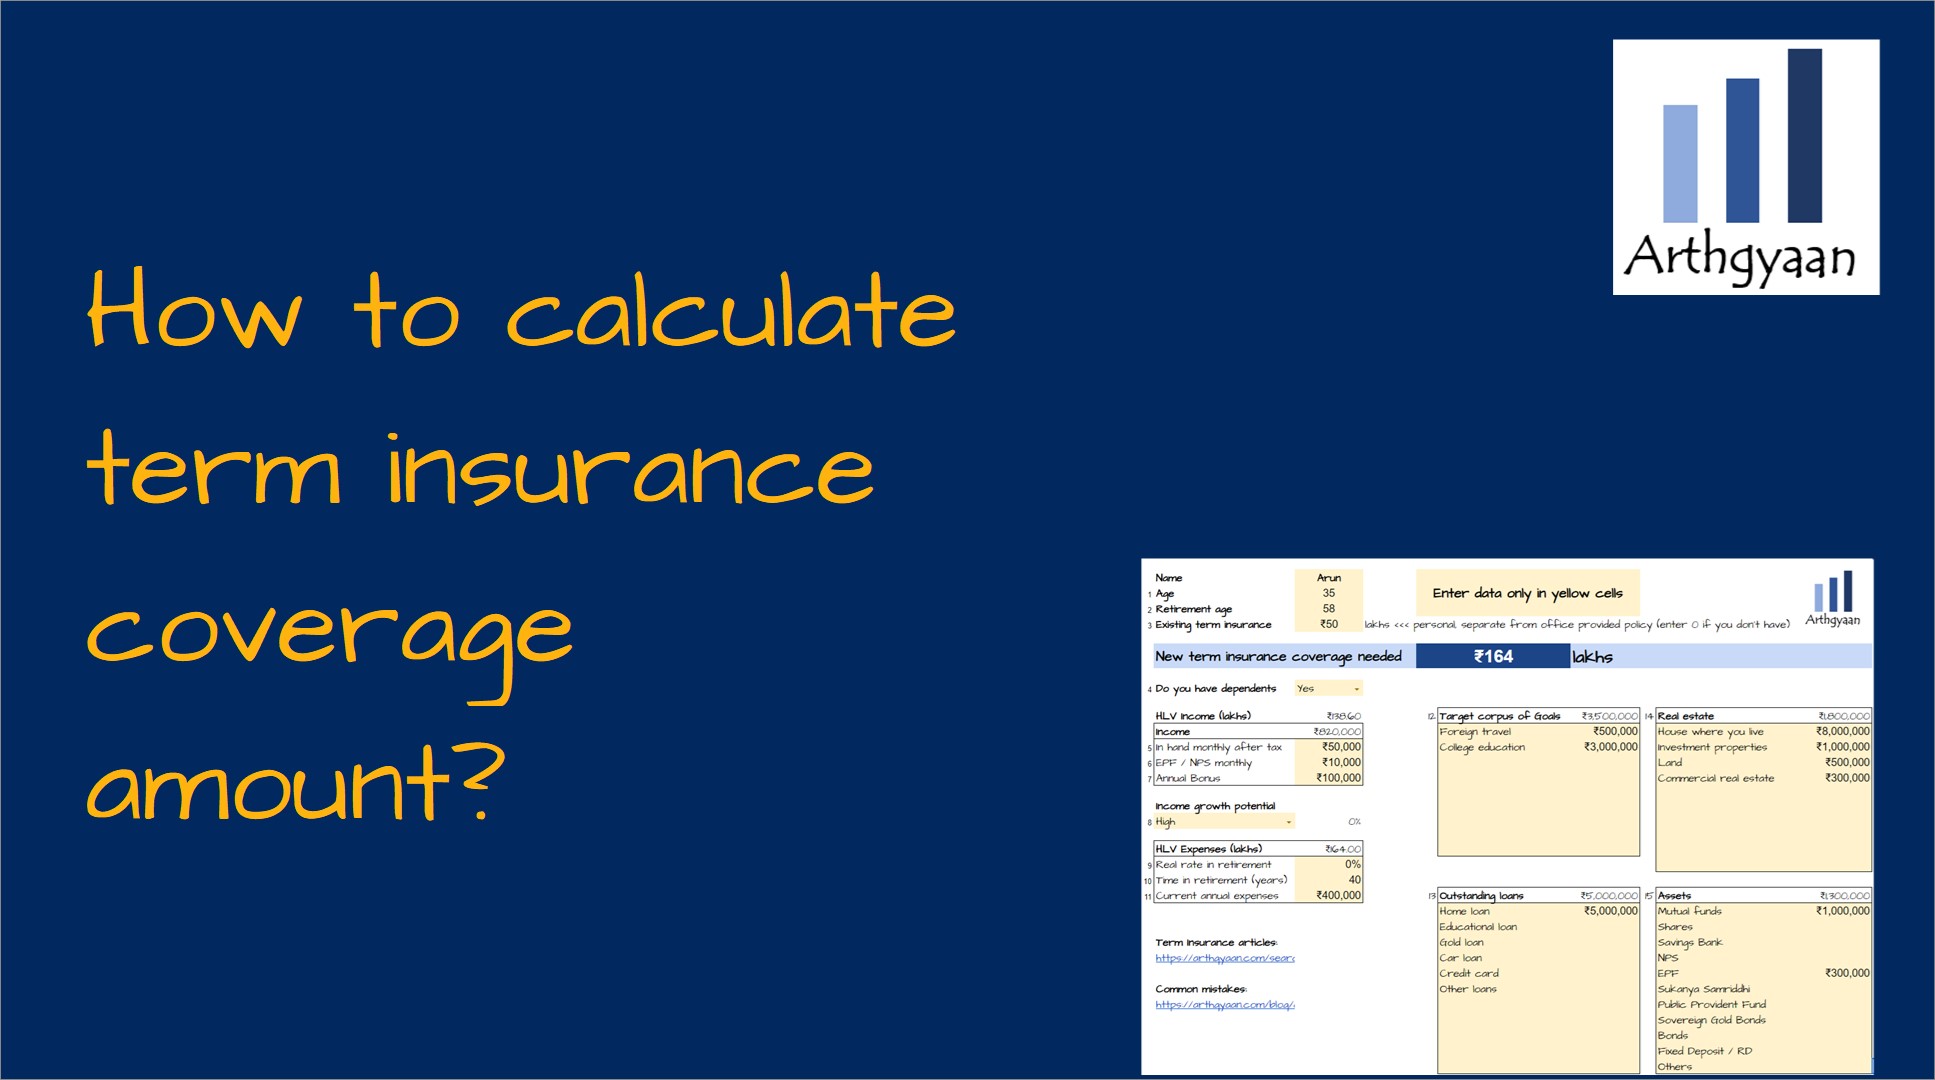 <p>This article gives you an easy-to-use calculator to know your term insurance coverage amount.</p>

